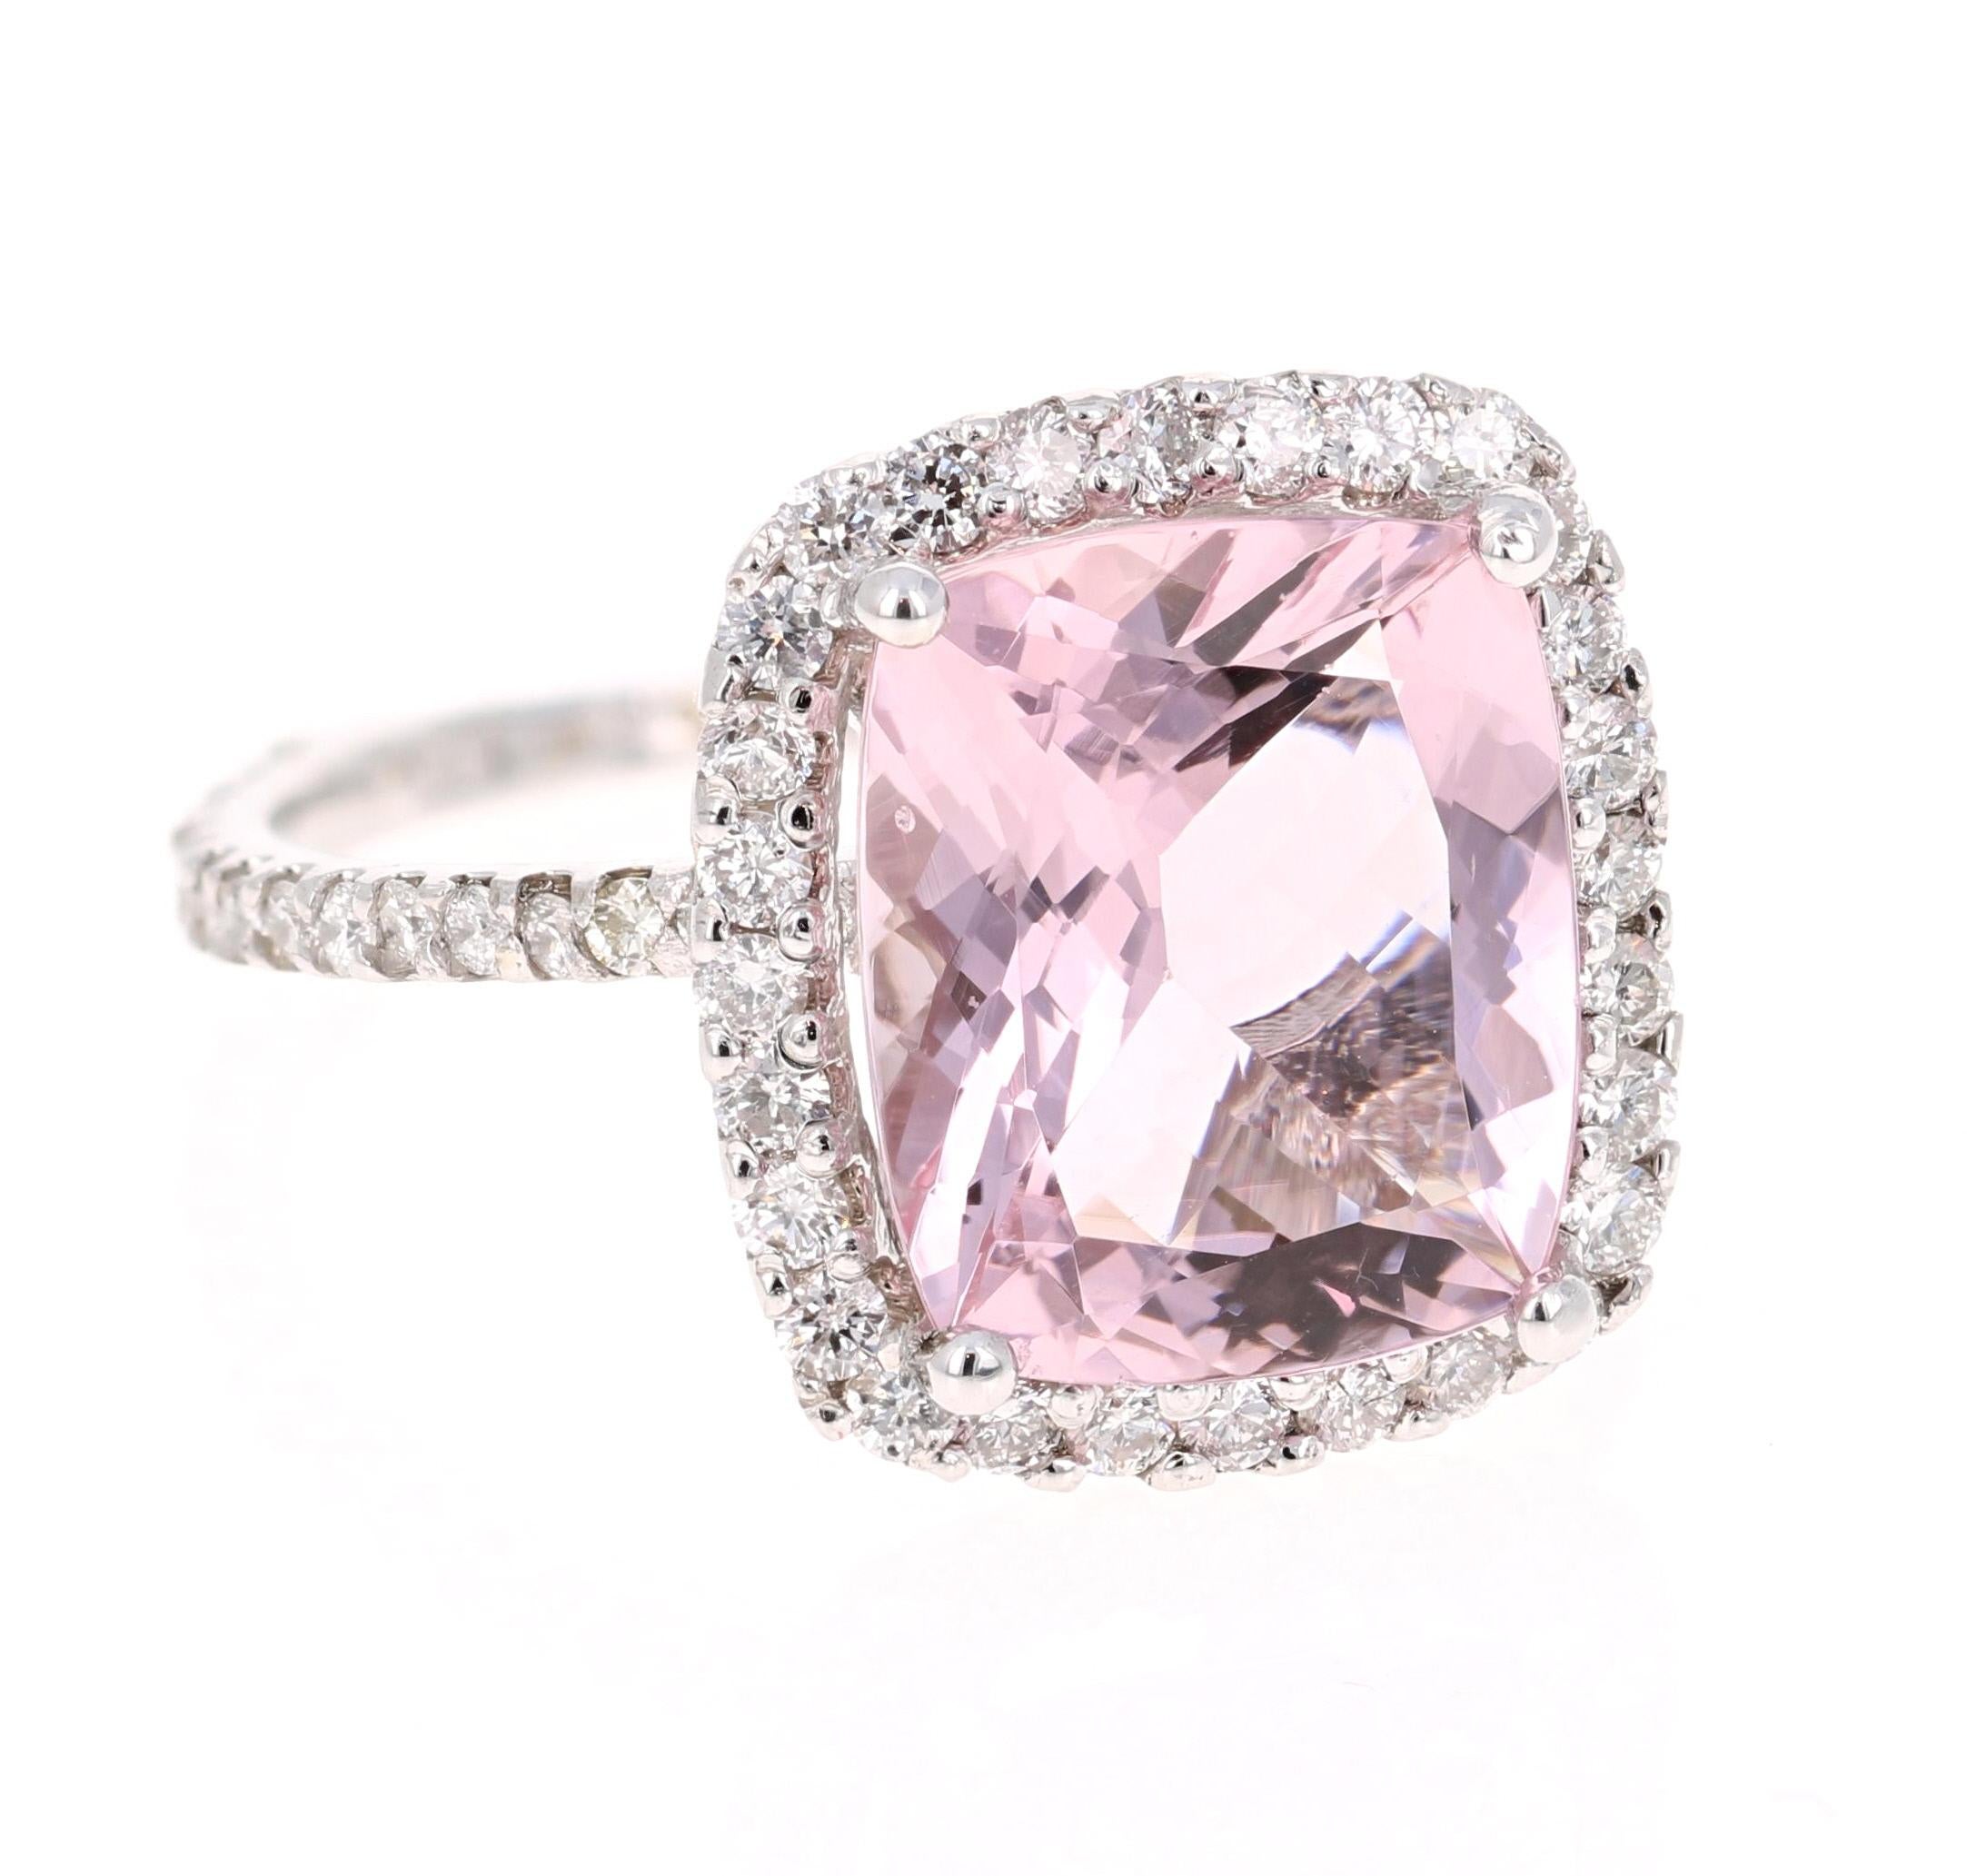 A lovely Engagement Ring Option or as an alternate to a Pink Diamond Ring! 

This gorgeous and classy Morganite and Diamond Ring has a 4.06 Carat Cushion Cut Pink Morganite and is surrounded by a simple Halo of  60 Round Cut Diamonds that weigh 0.77